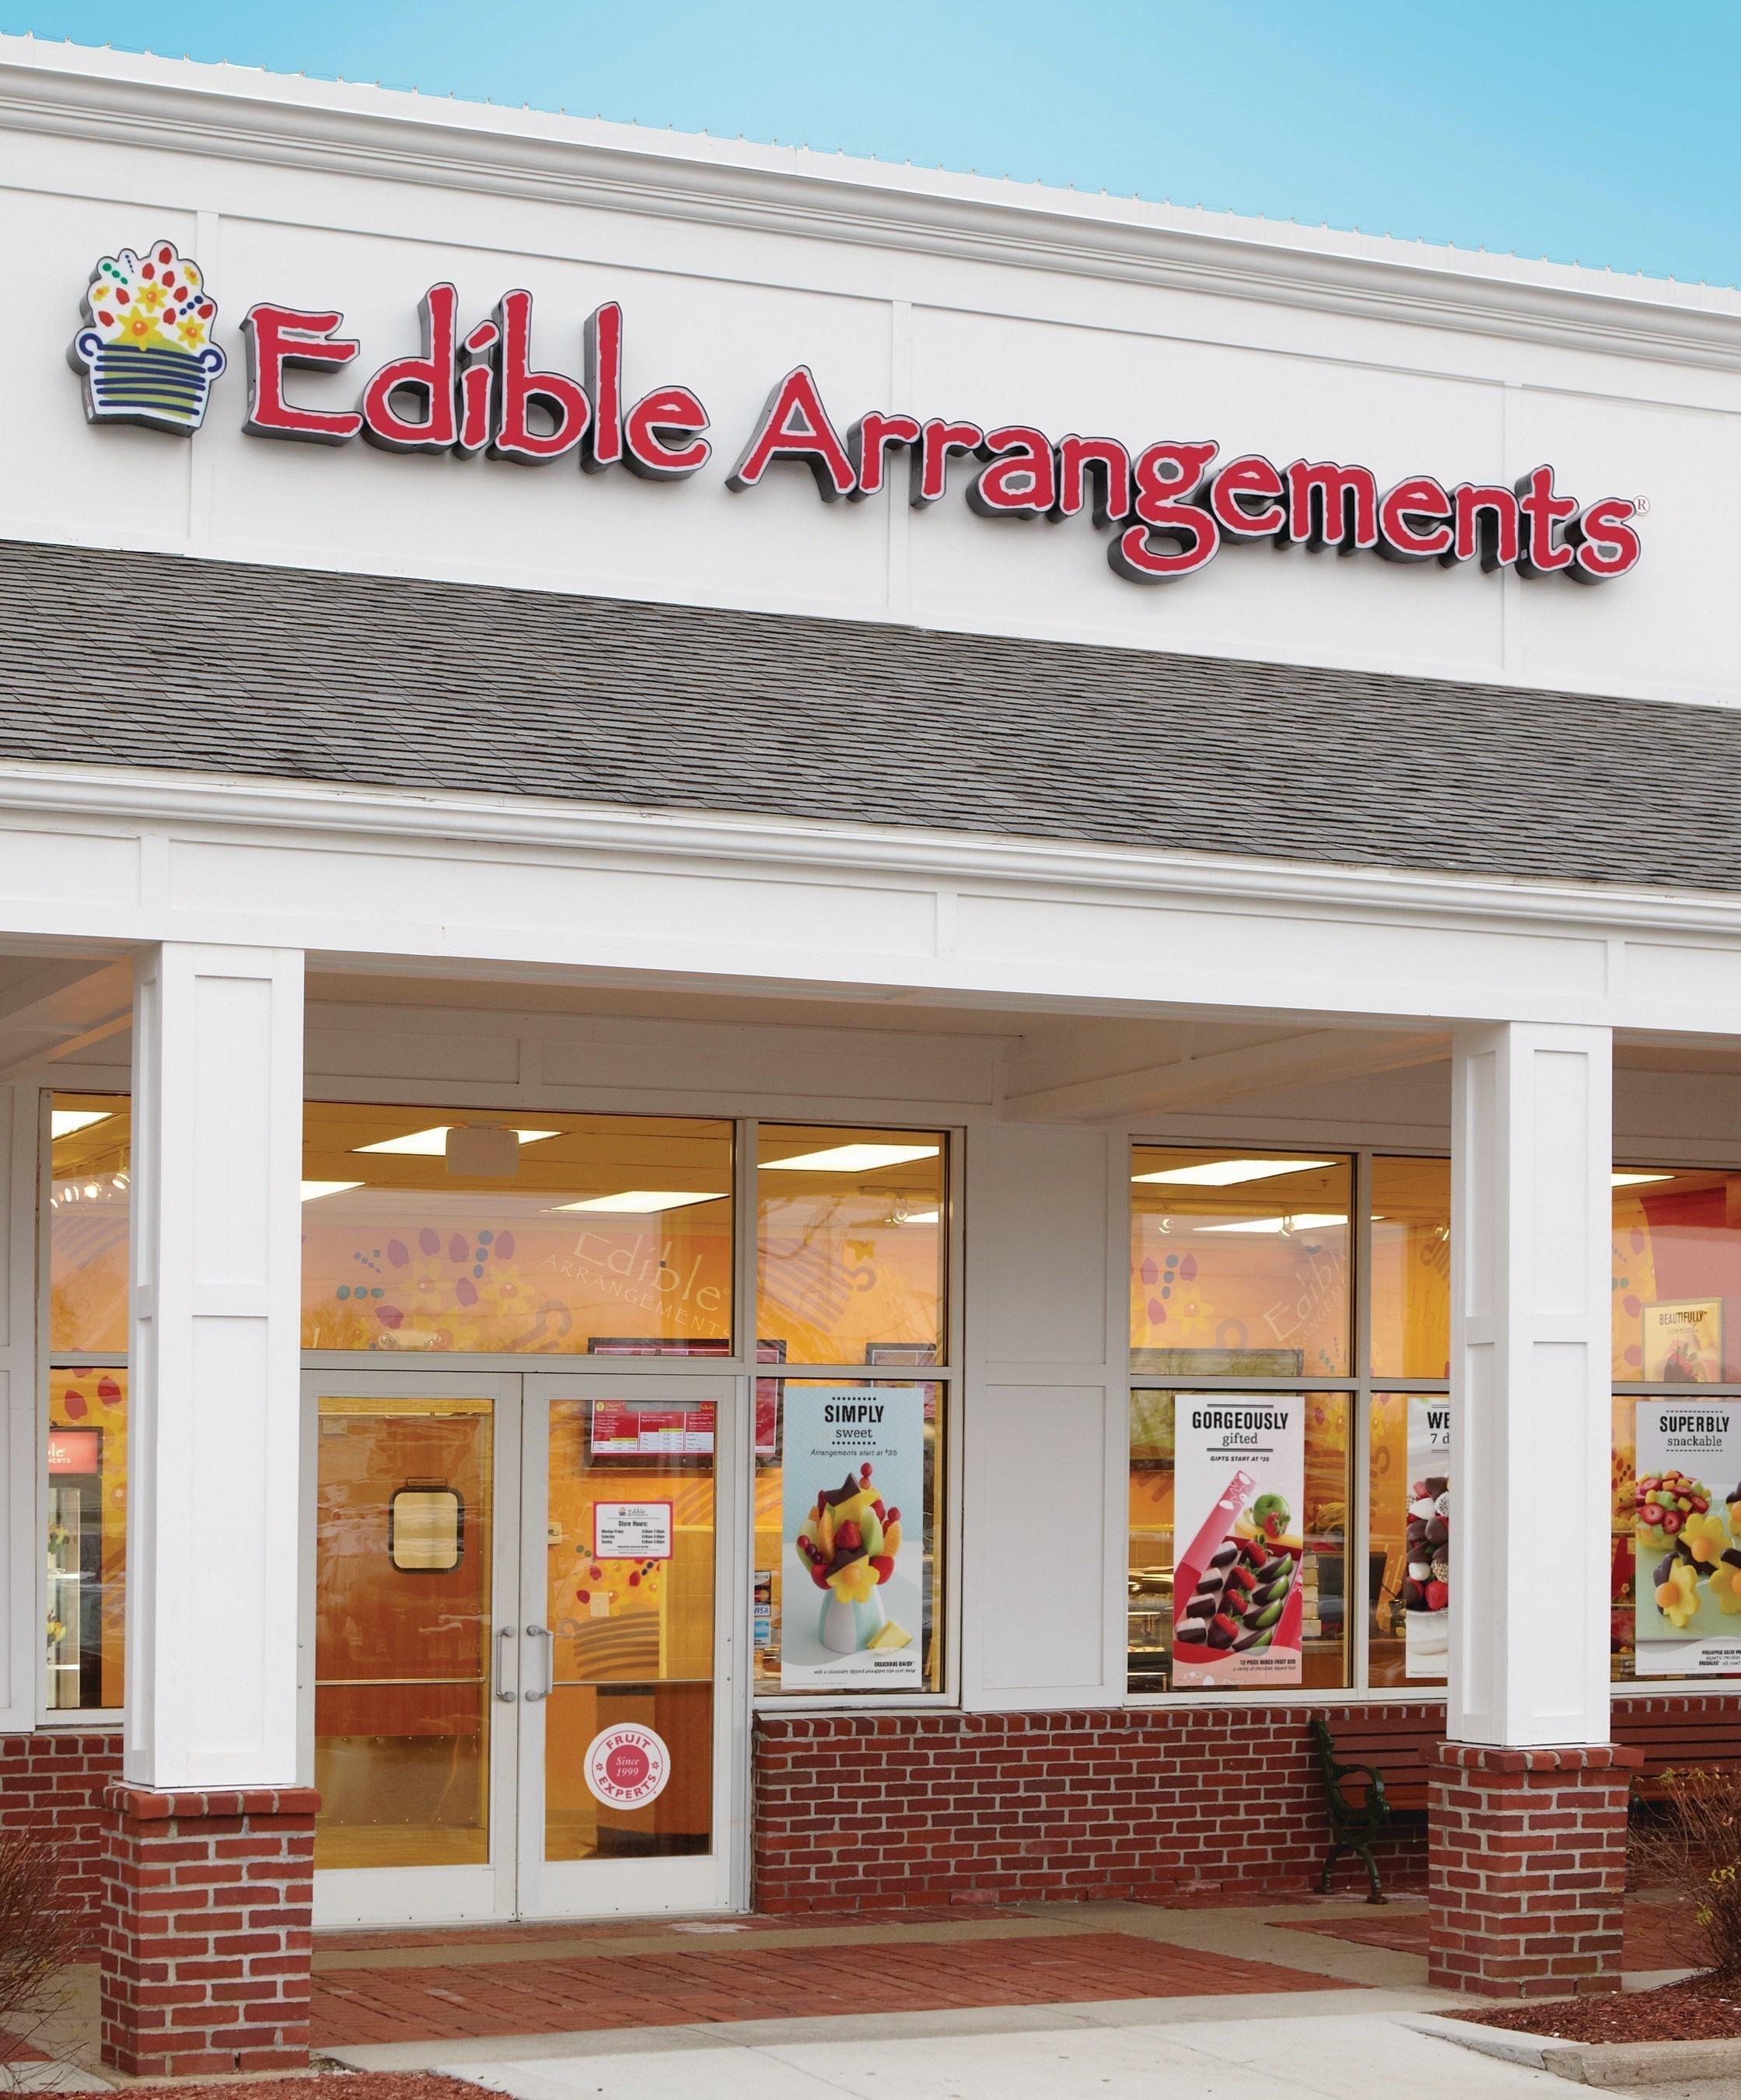 An Edible Arrangements shop in Canton, MA. The company has engaged Buxton to help maximize its growth potential.